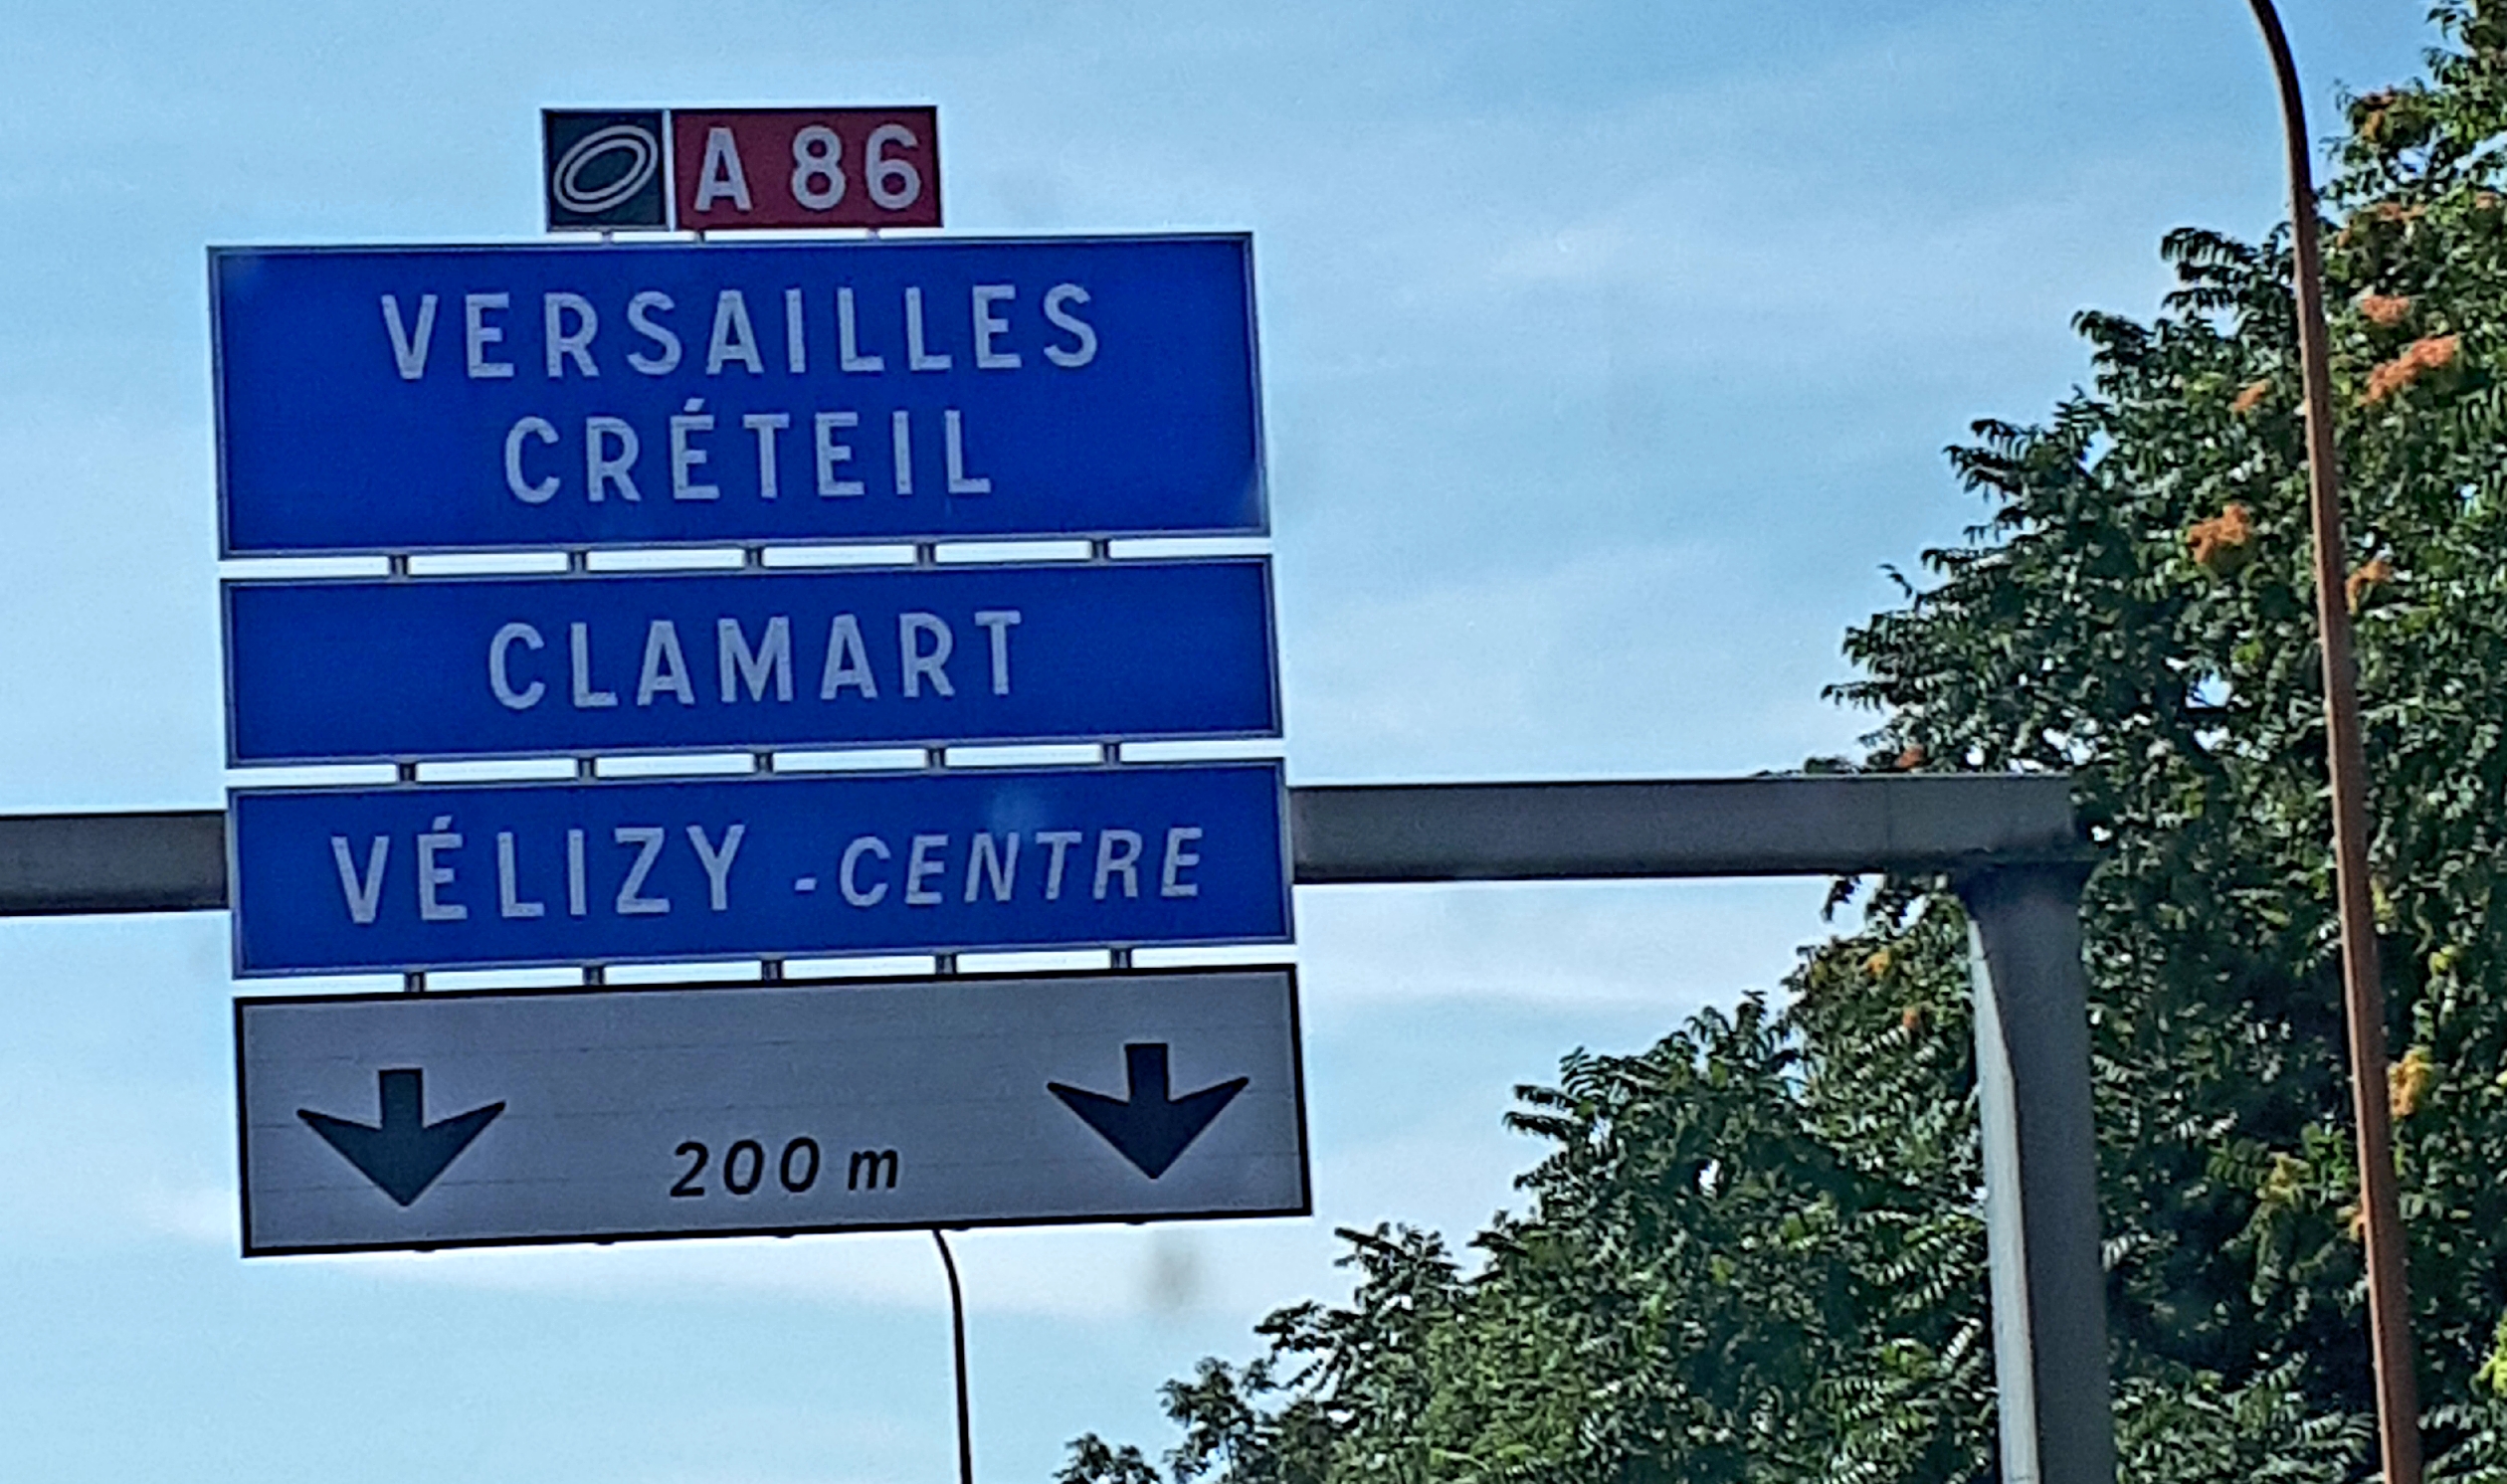 French autoroute sign to Versailles and other places